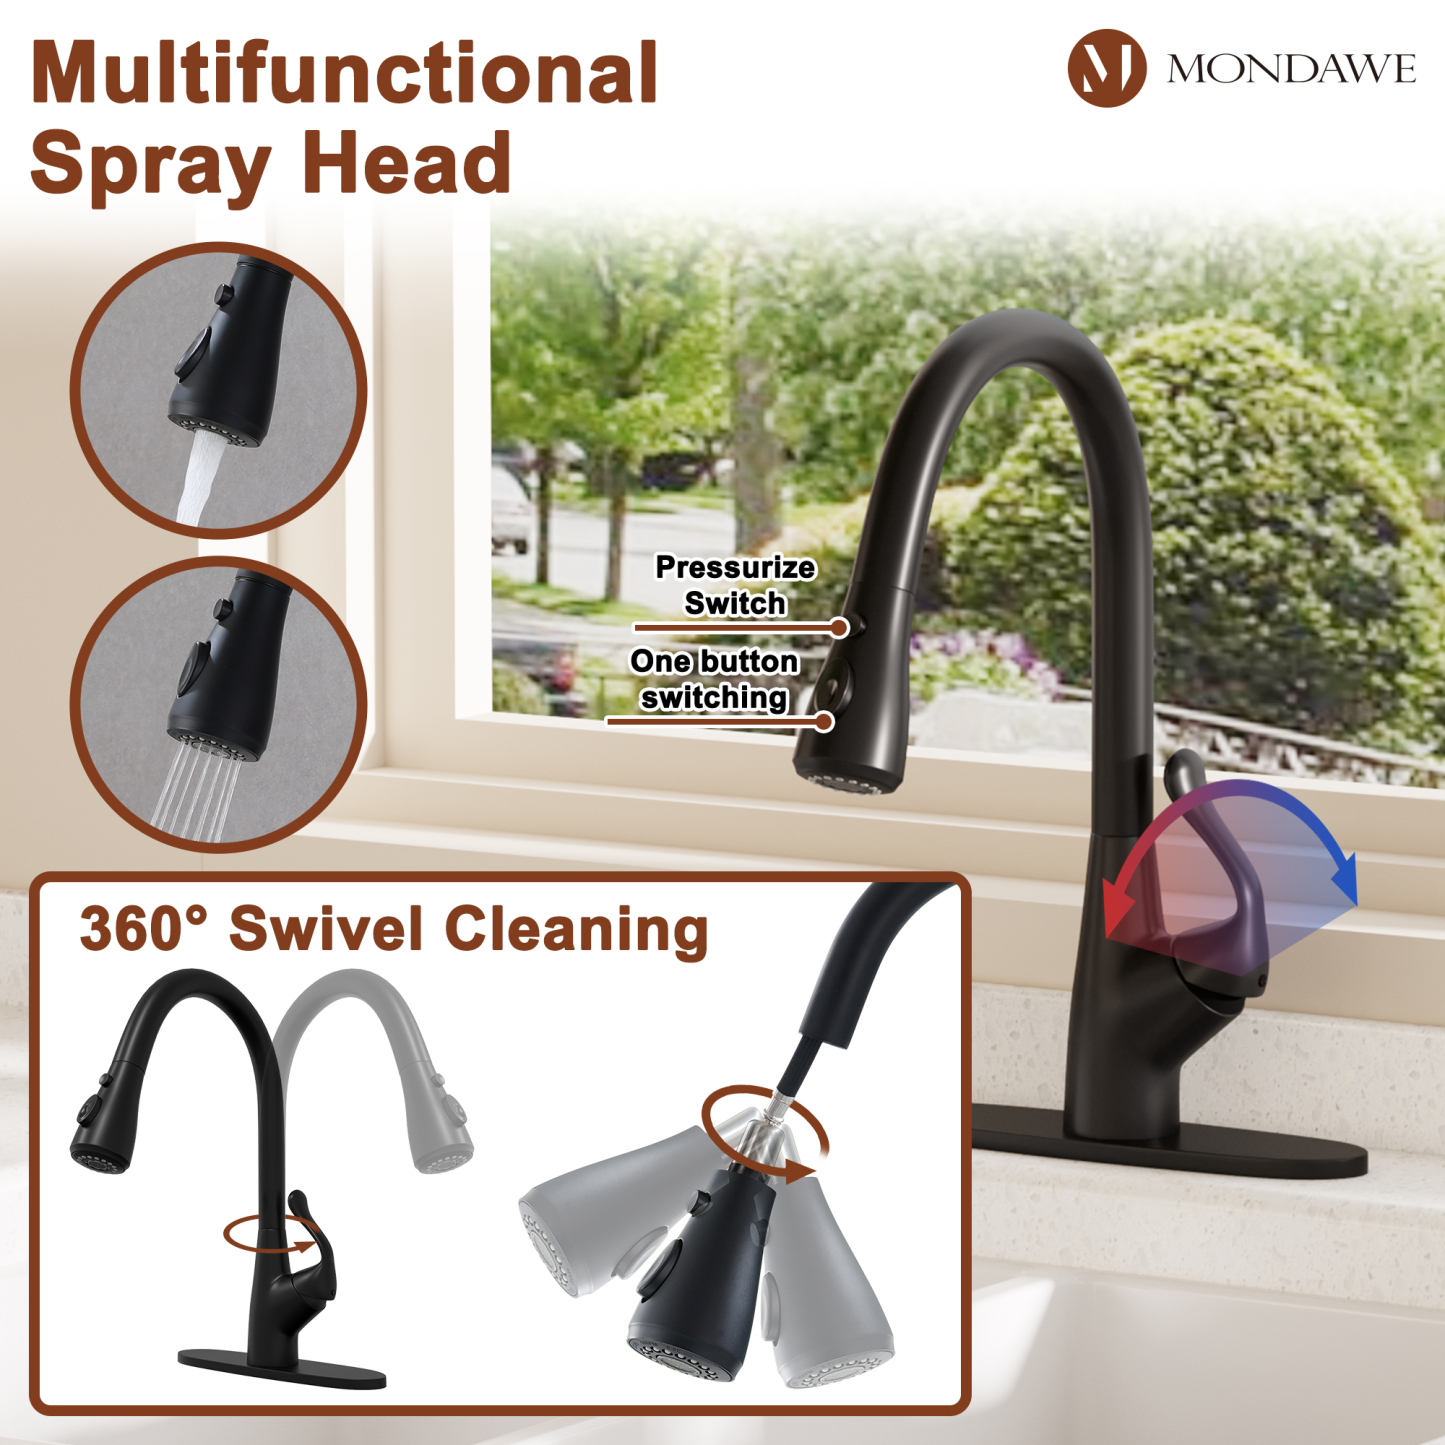 Mondawe Kitchen Faucet with Pull Down, 1.8 gpm Single Handle Kitchen Sink Faucet, Lead-Free Copper for Bar Laundry Kitchen Sink-Mondawe